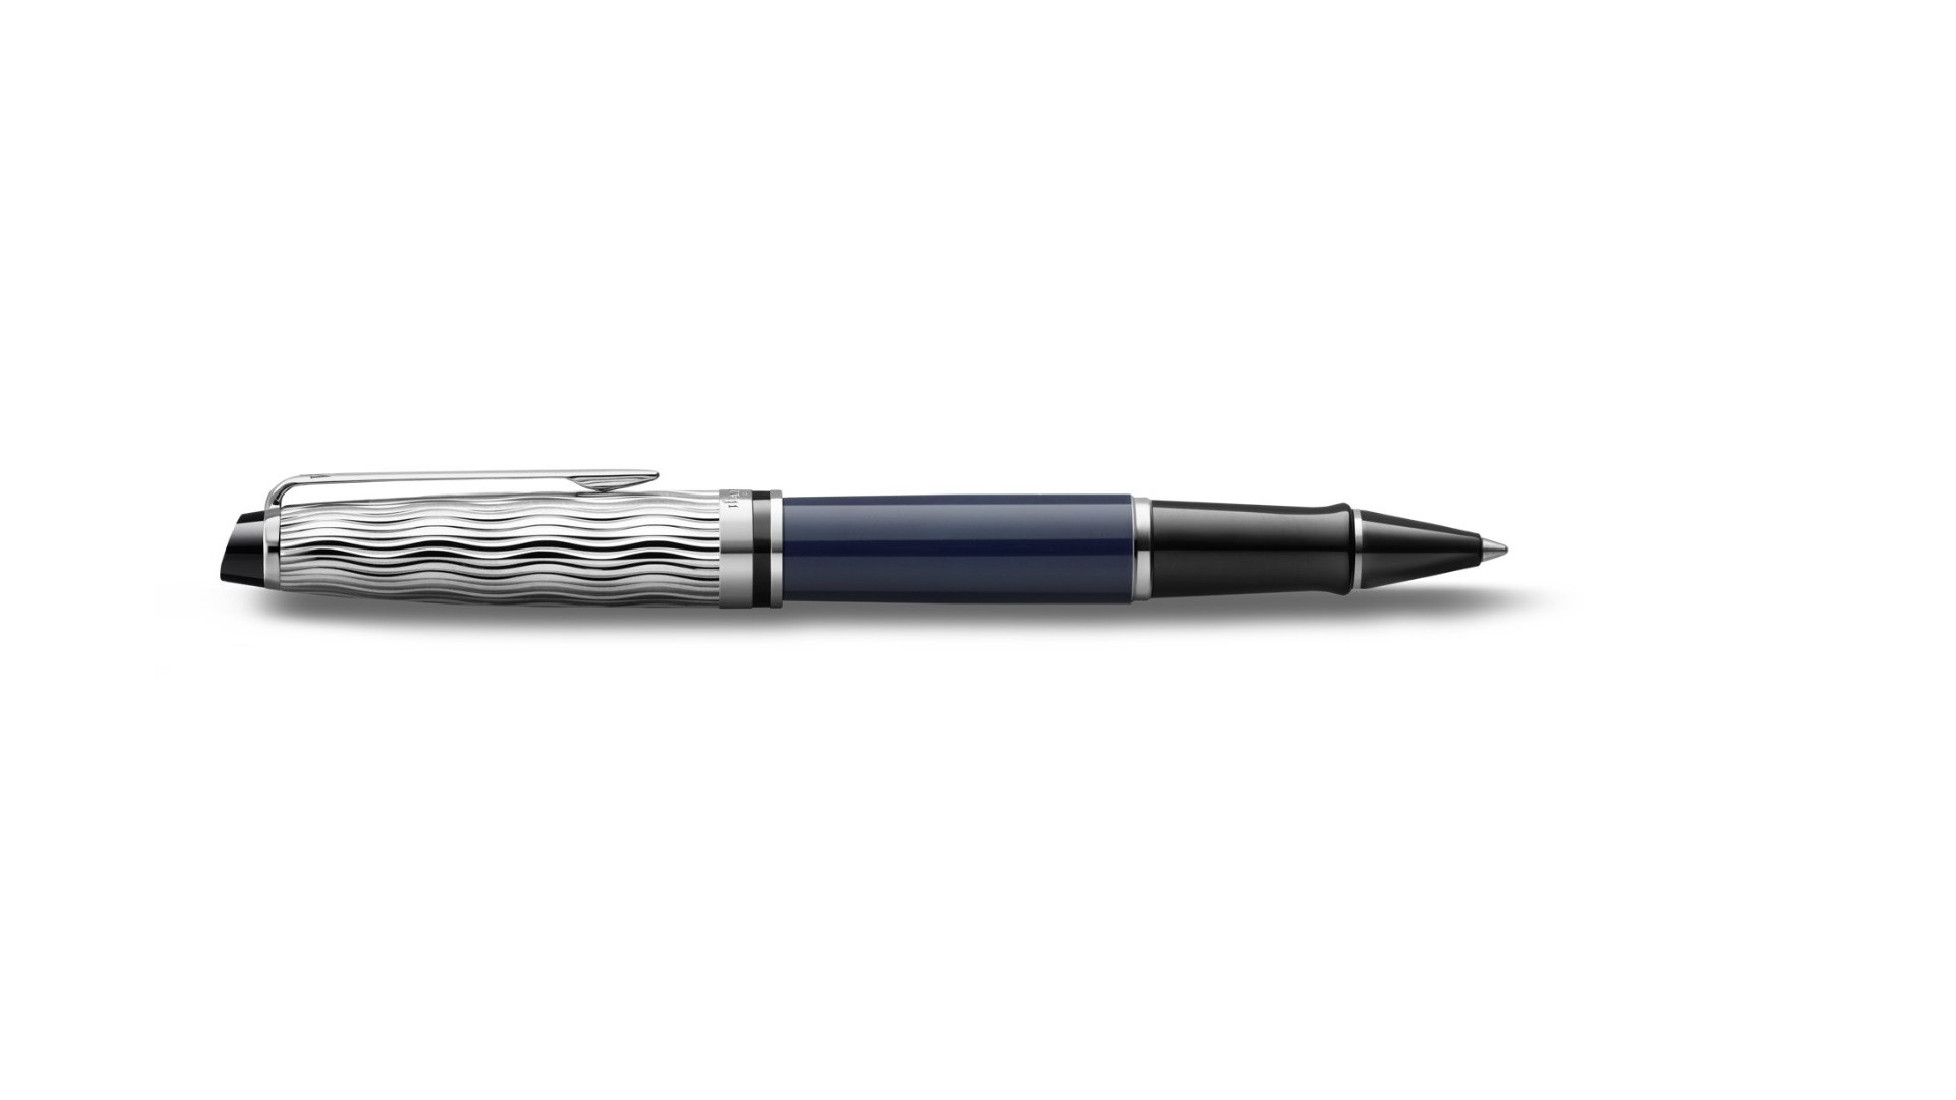 Waterman Expert Deluxe Blue ct special edition 2022 rollerball